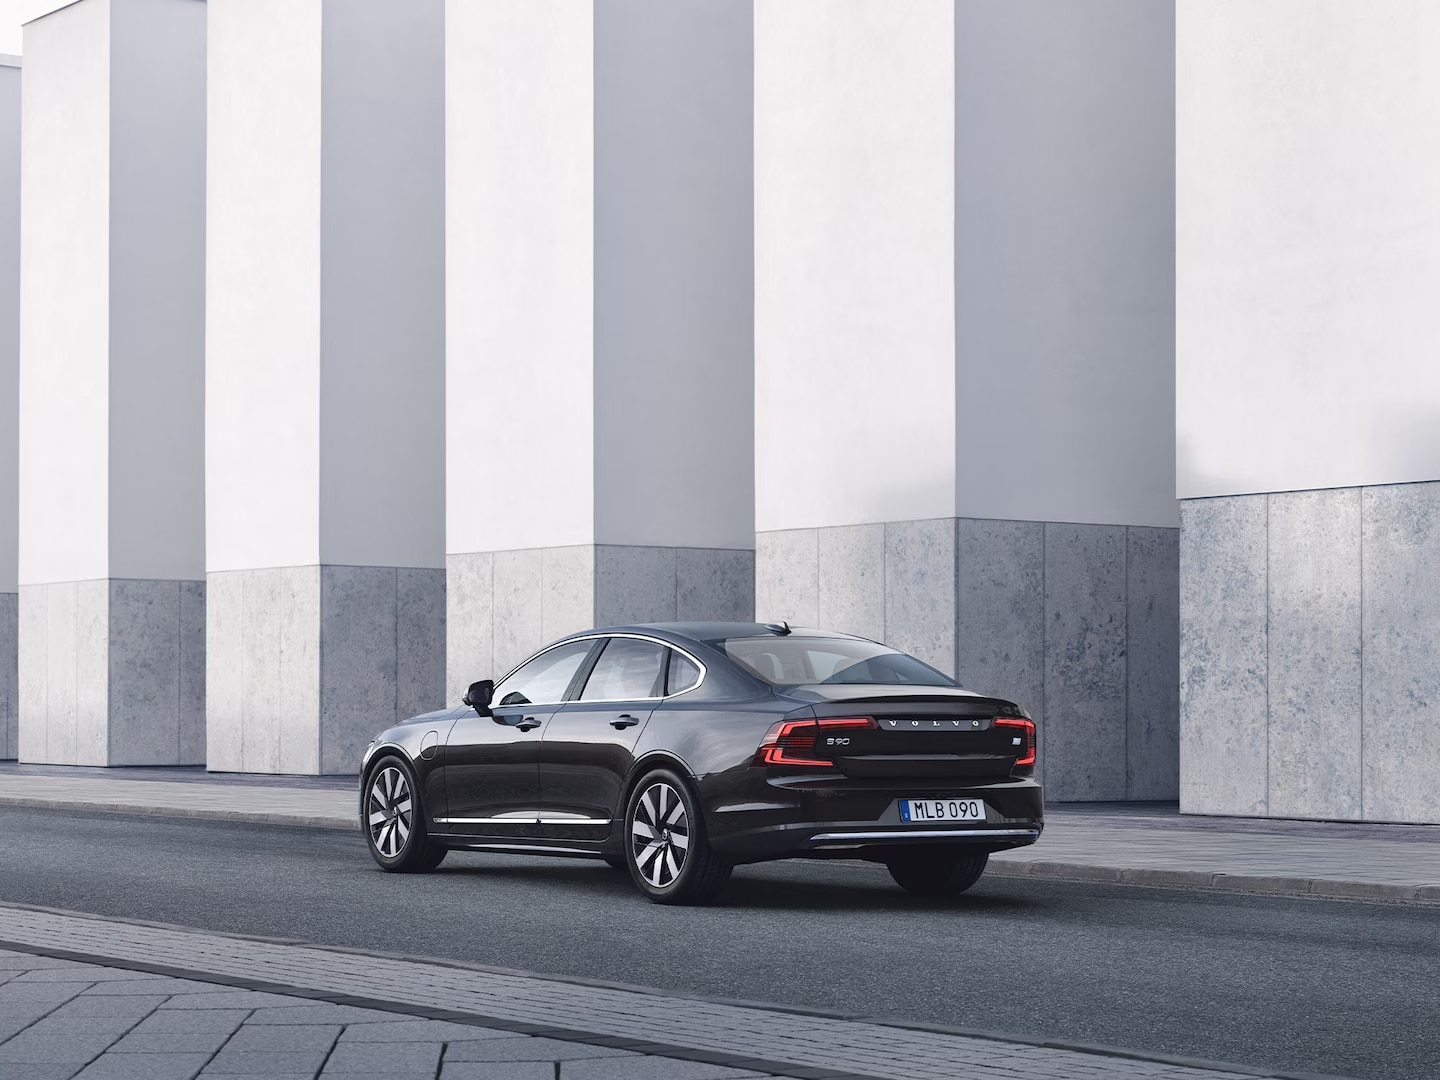 Volvo S90 Recharge seen from rear side in front of concrete wall.